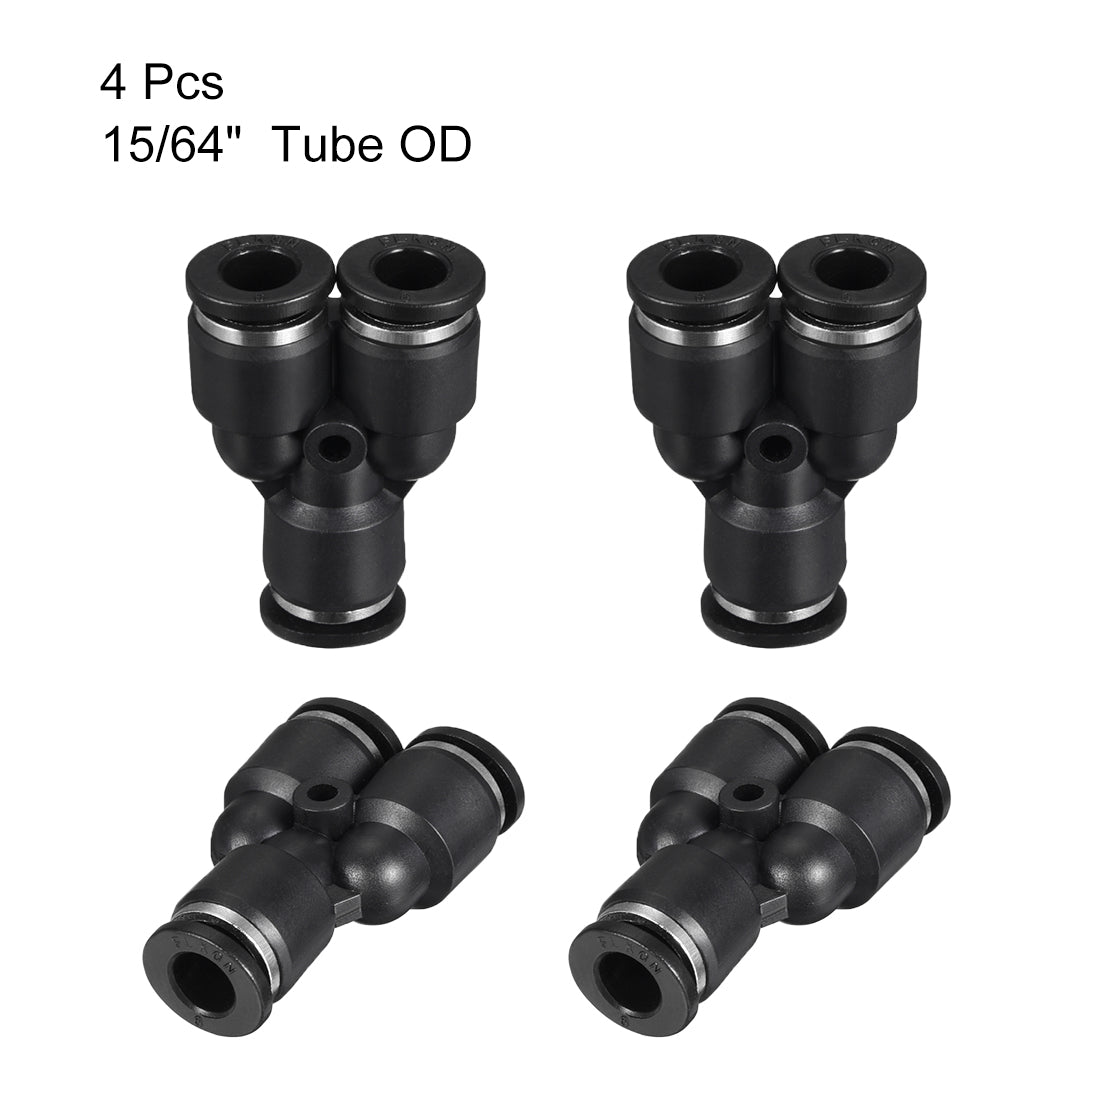 uxcell Uxcell 4pcs Push To Connect Fittings Y Type Tube Connect 6mm or 15/64" od Push Fit Fittings Tube Fittings Push Lock Black(6mm Y tee)